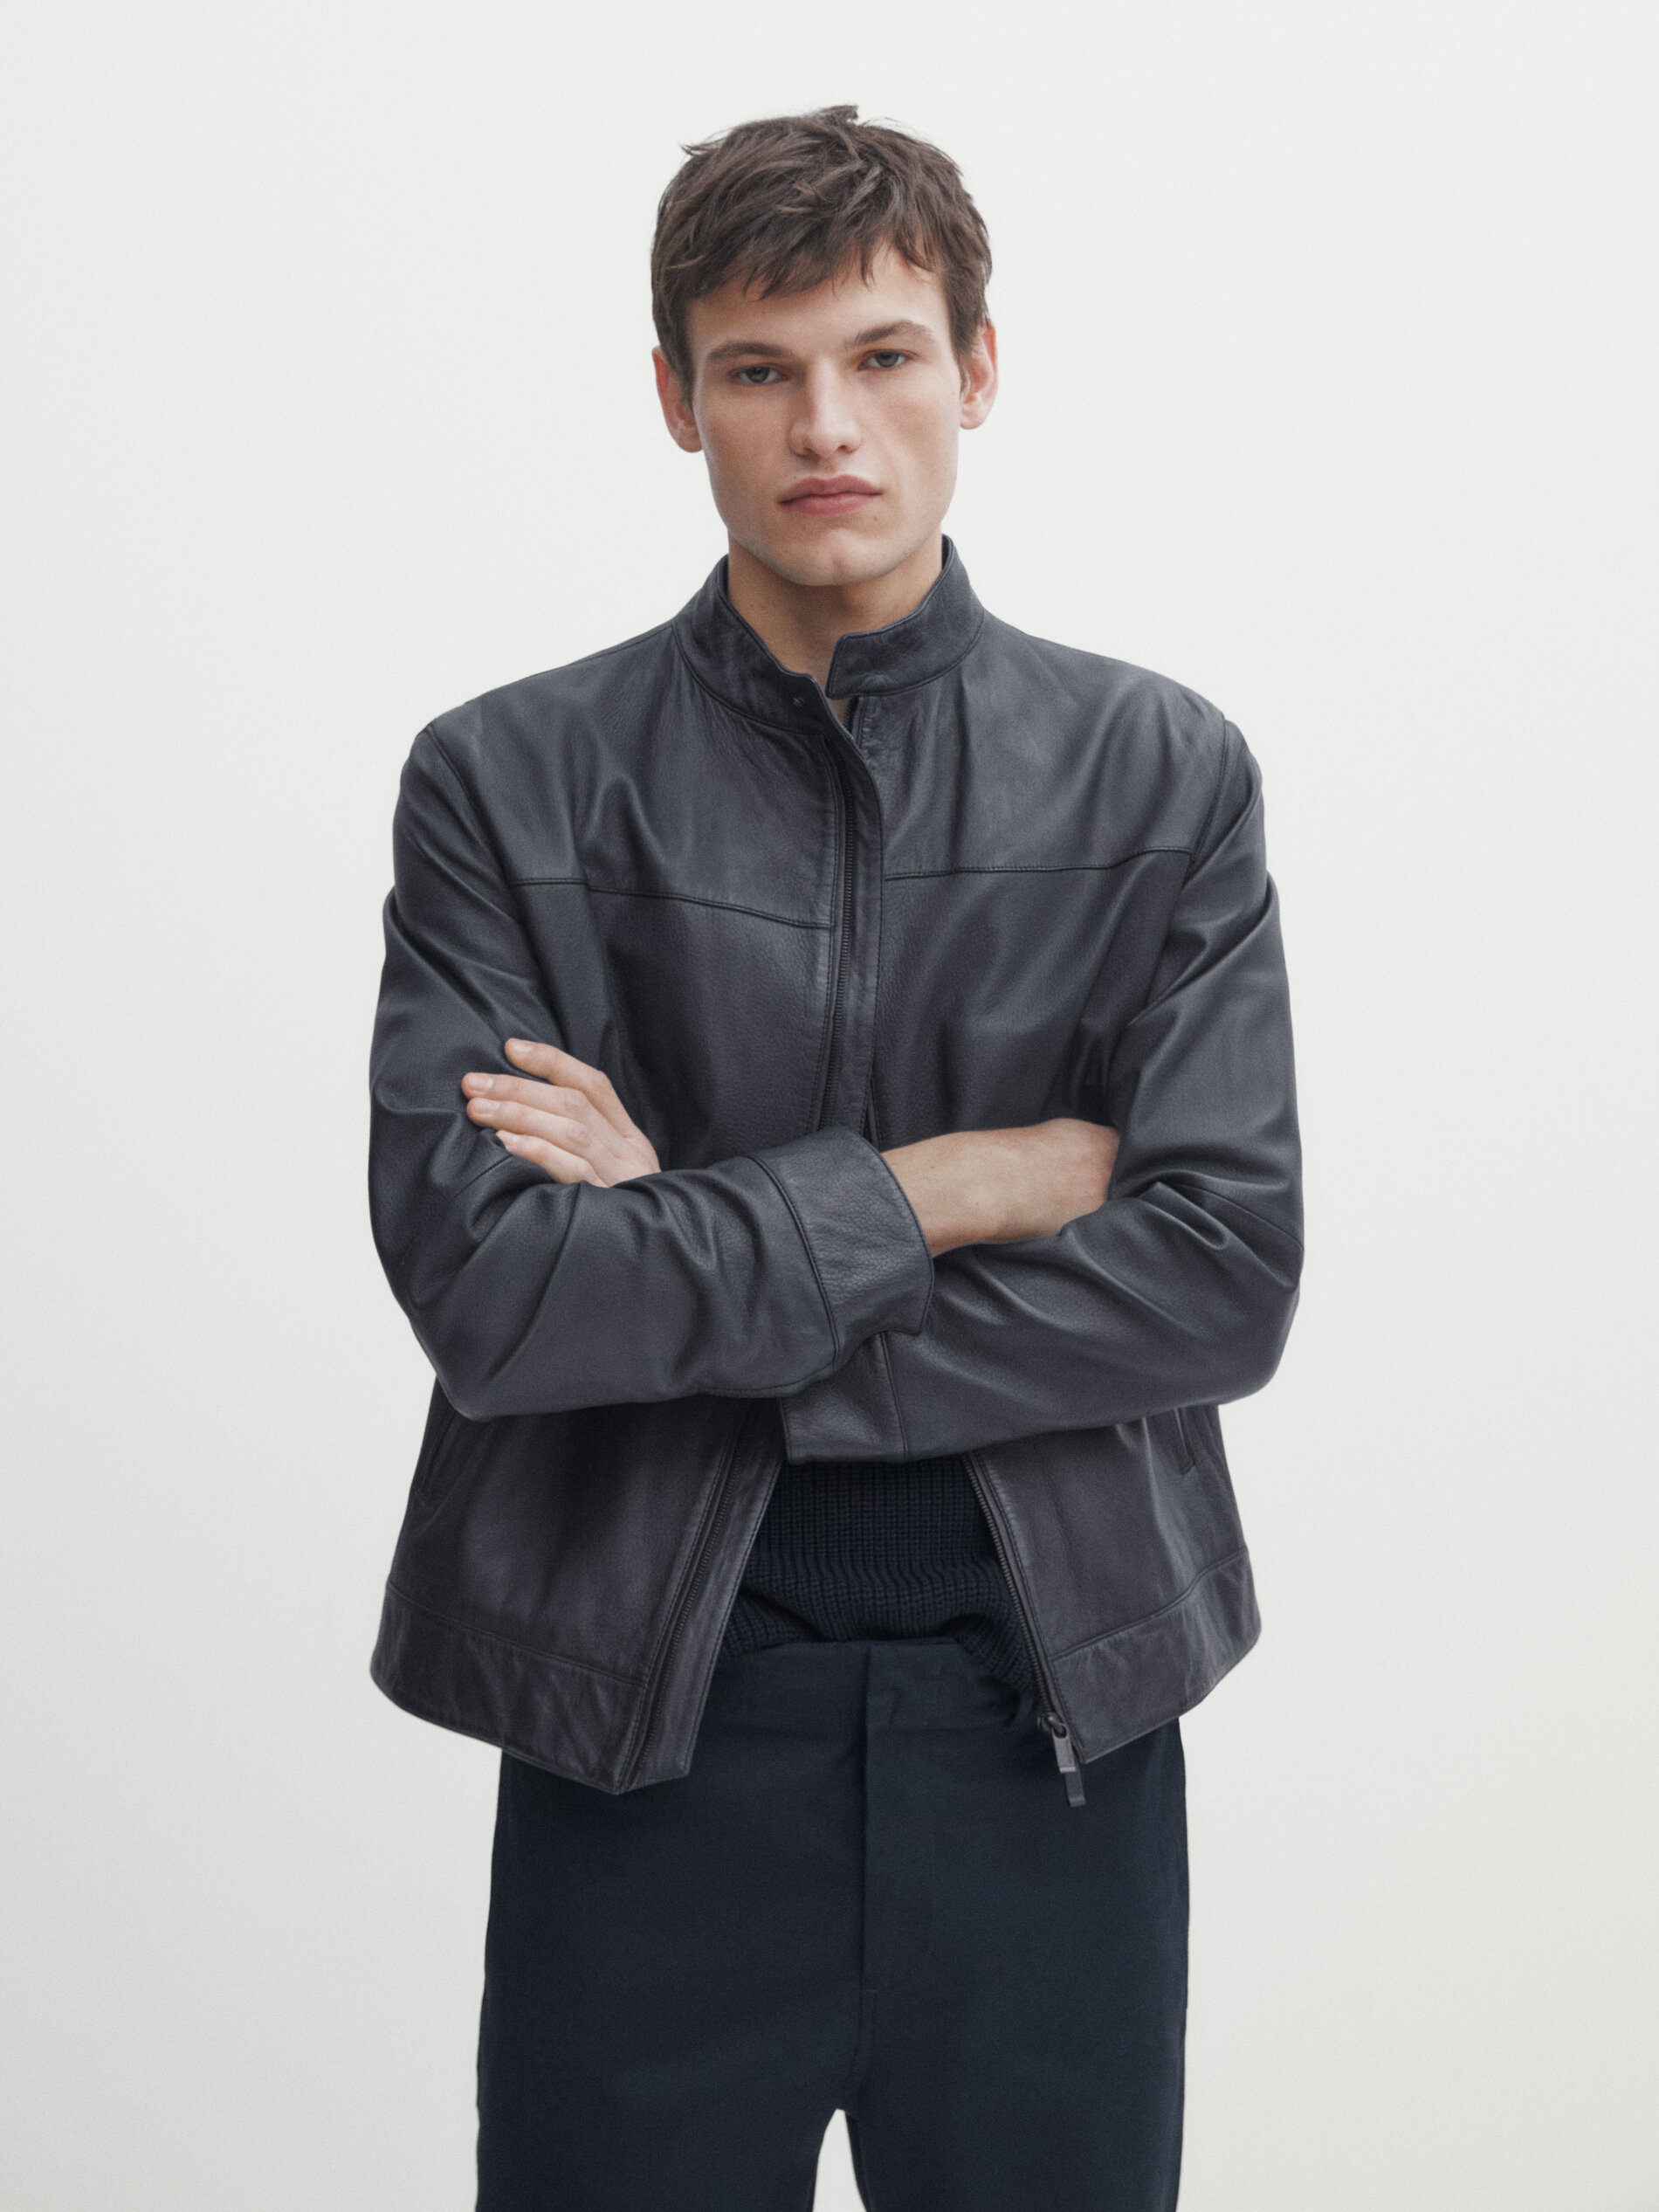 Midnight Blue Leather Mens Jacket: The Bravo — J.L. Rocha Collections